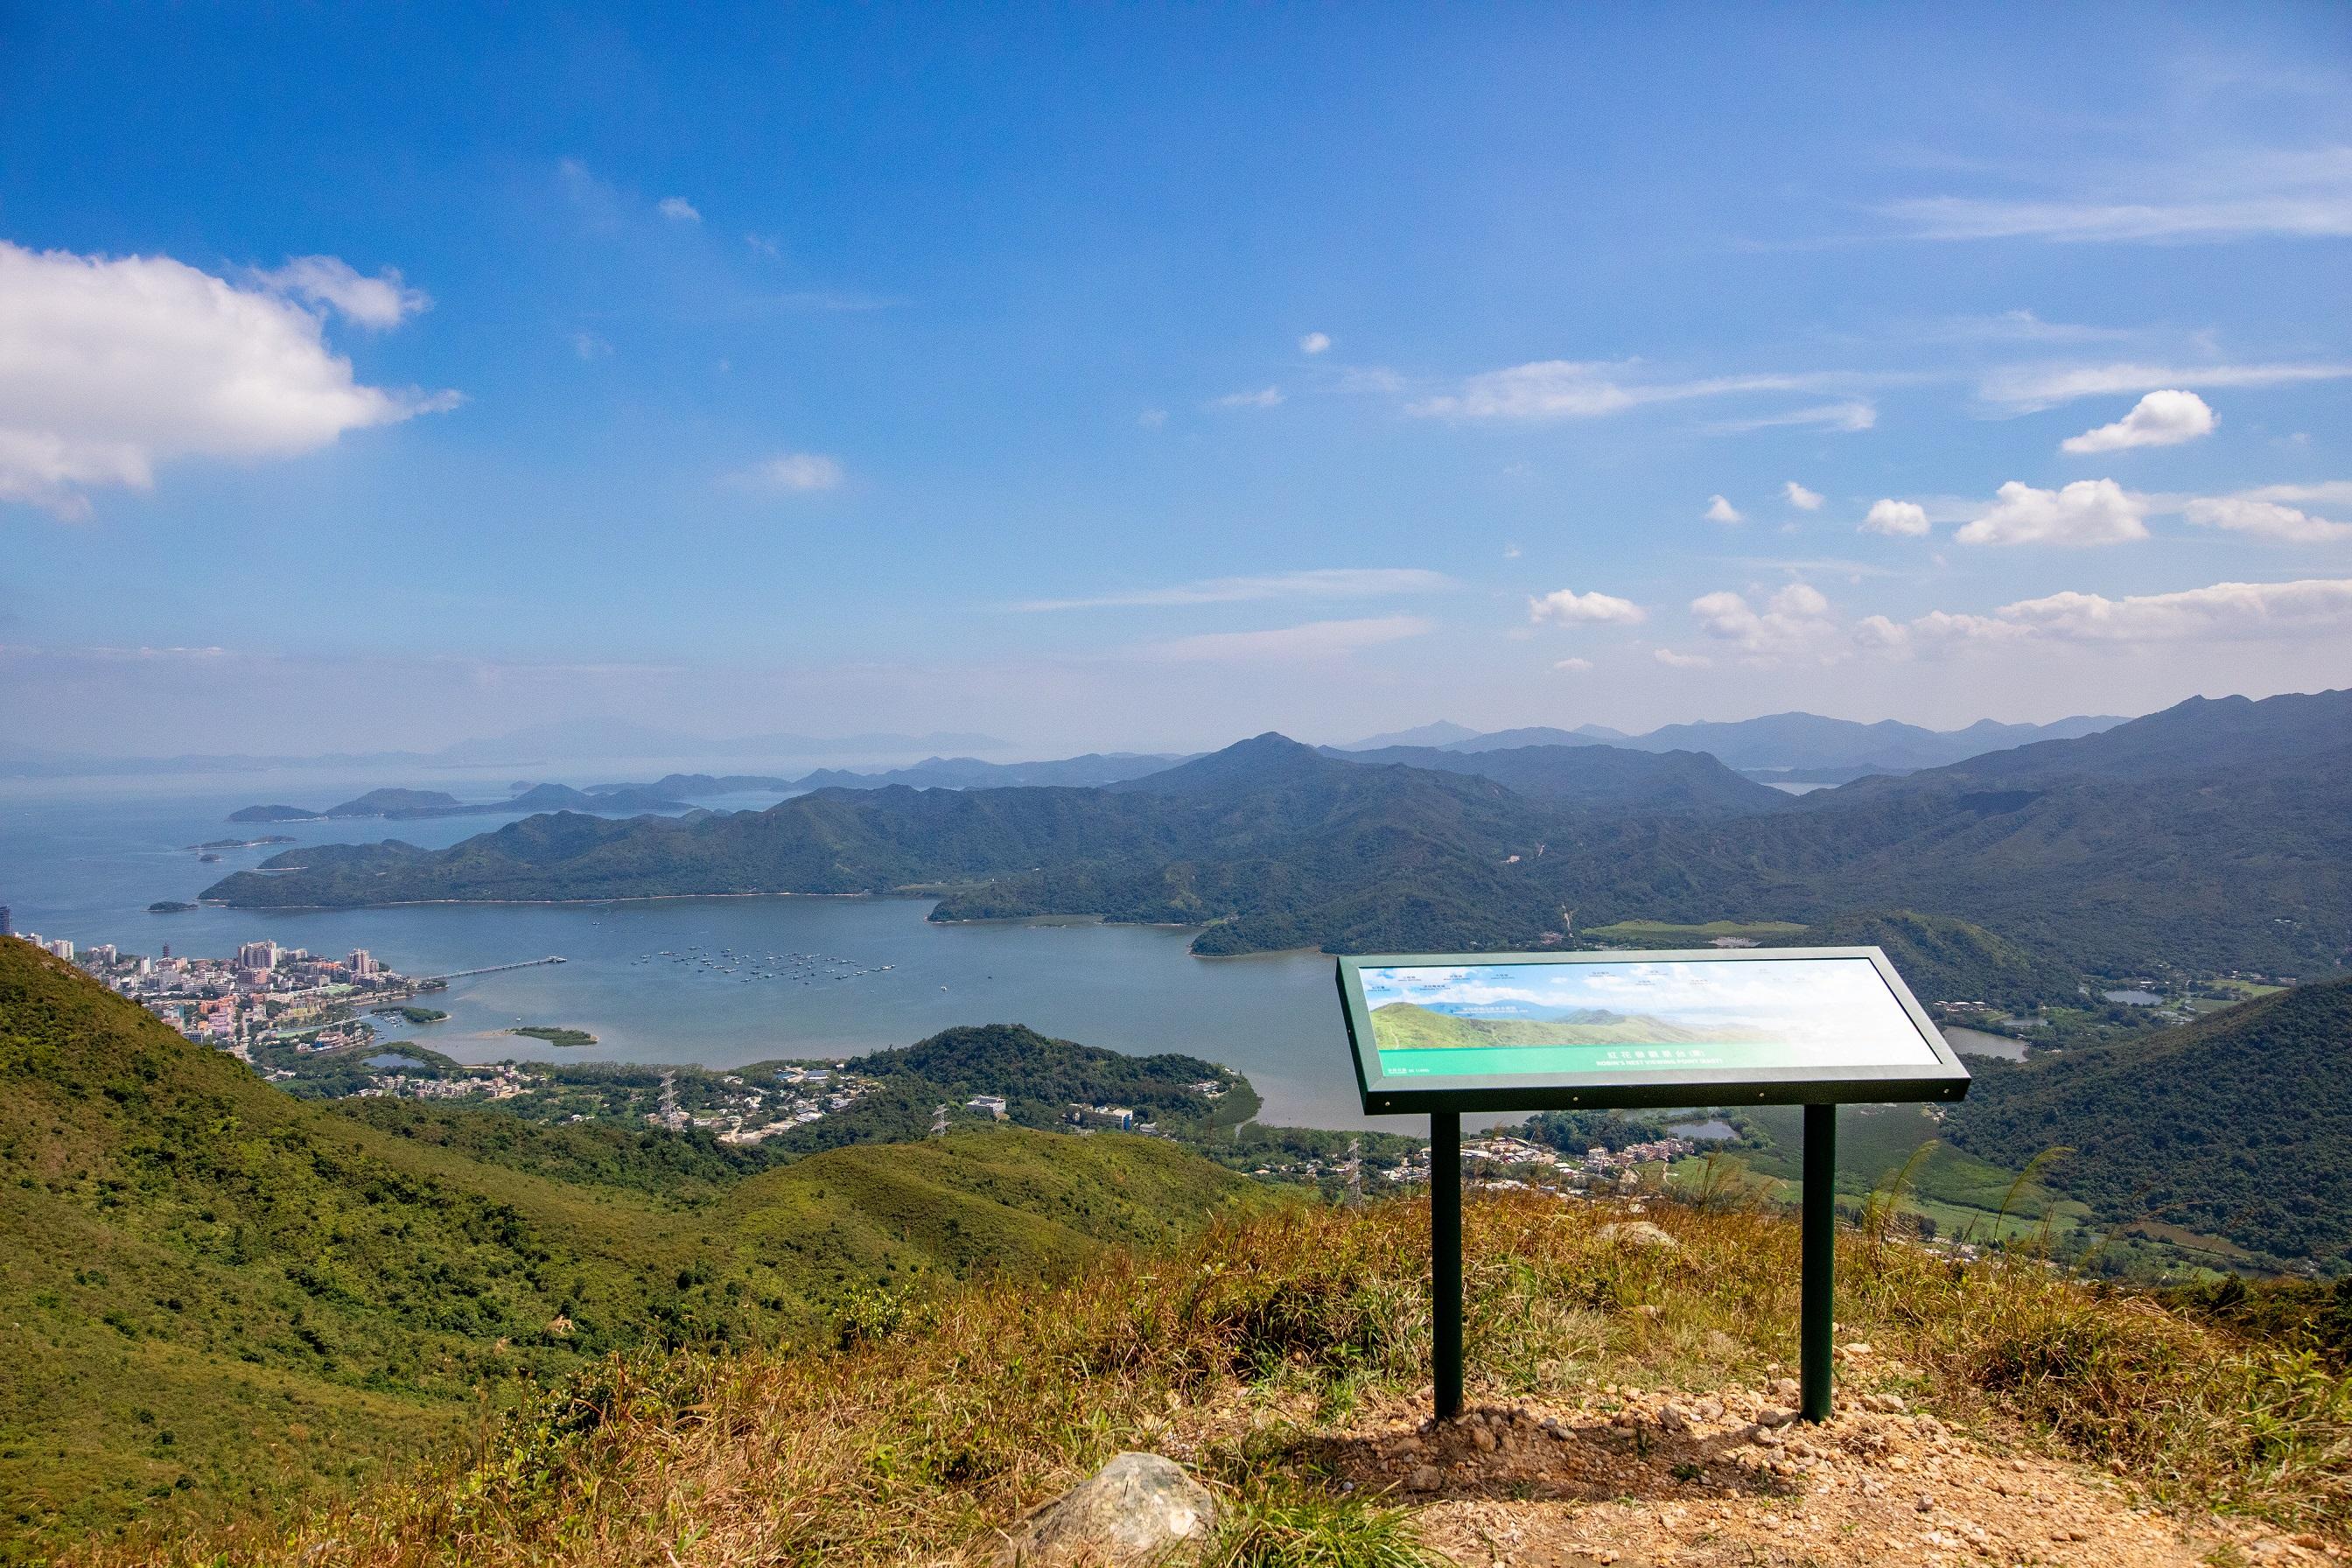 The Agriculture, Fisheries and Conservation Department announced today (March 1) that Robin's Nest Country Park was established the same day. Photo shows a view of Starling Inlet from the viewing point of Hung Fa Chai.

